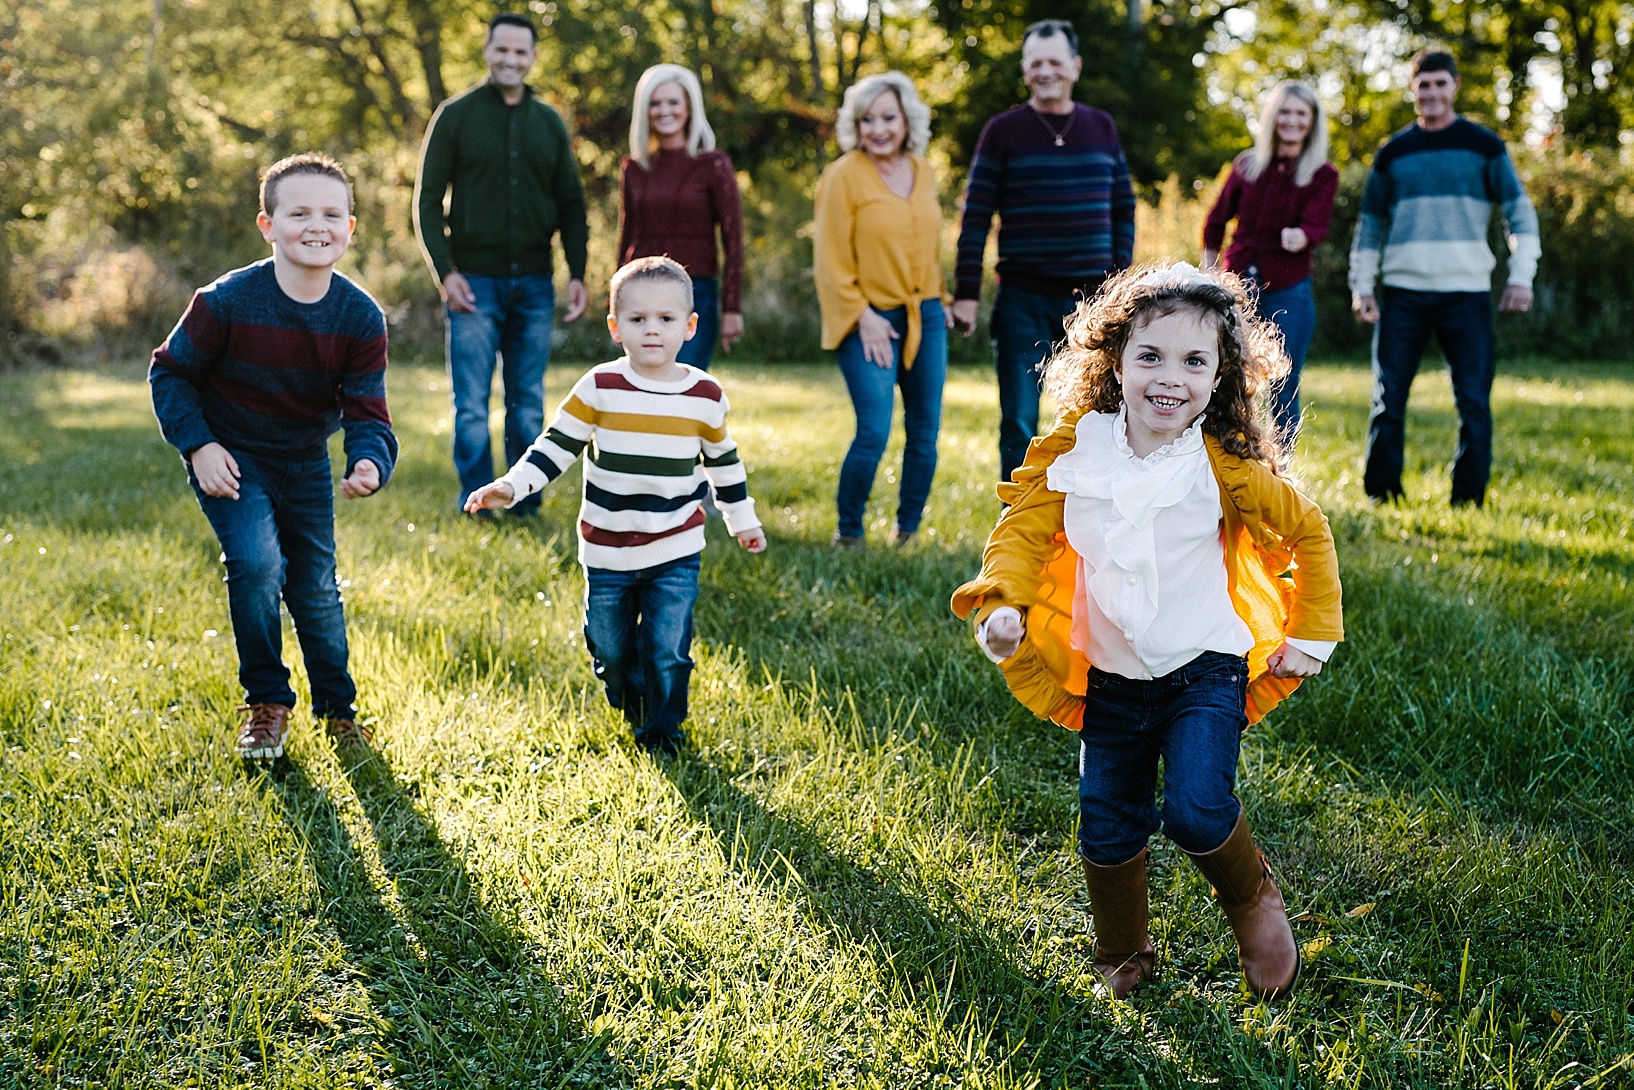 kids laughing and running while family stands behind them smiling